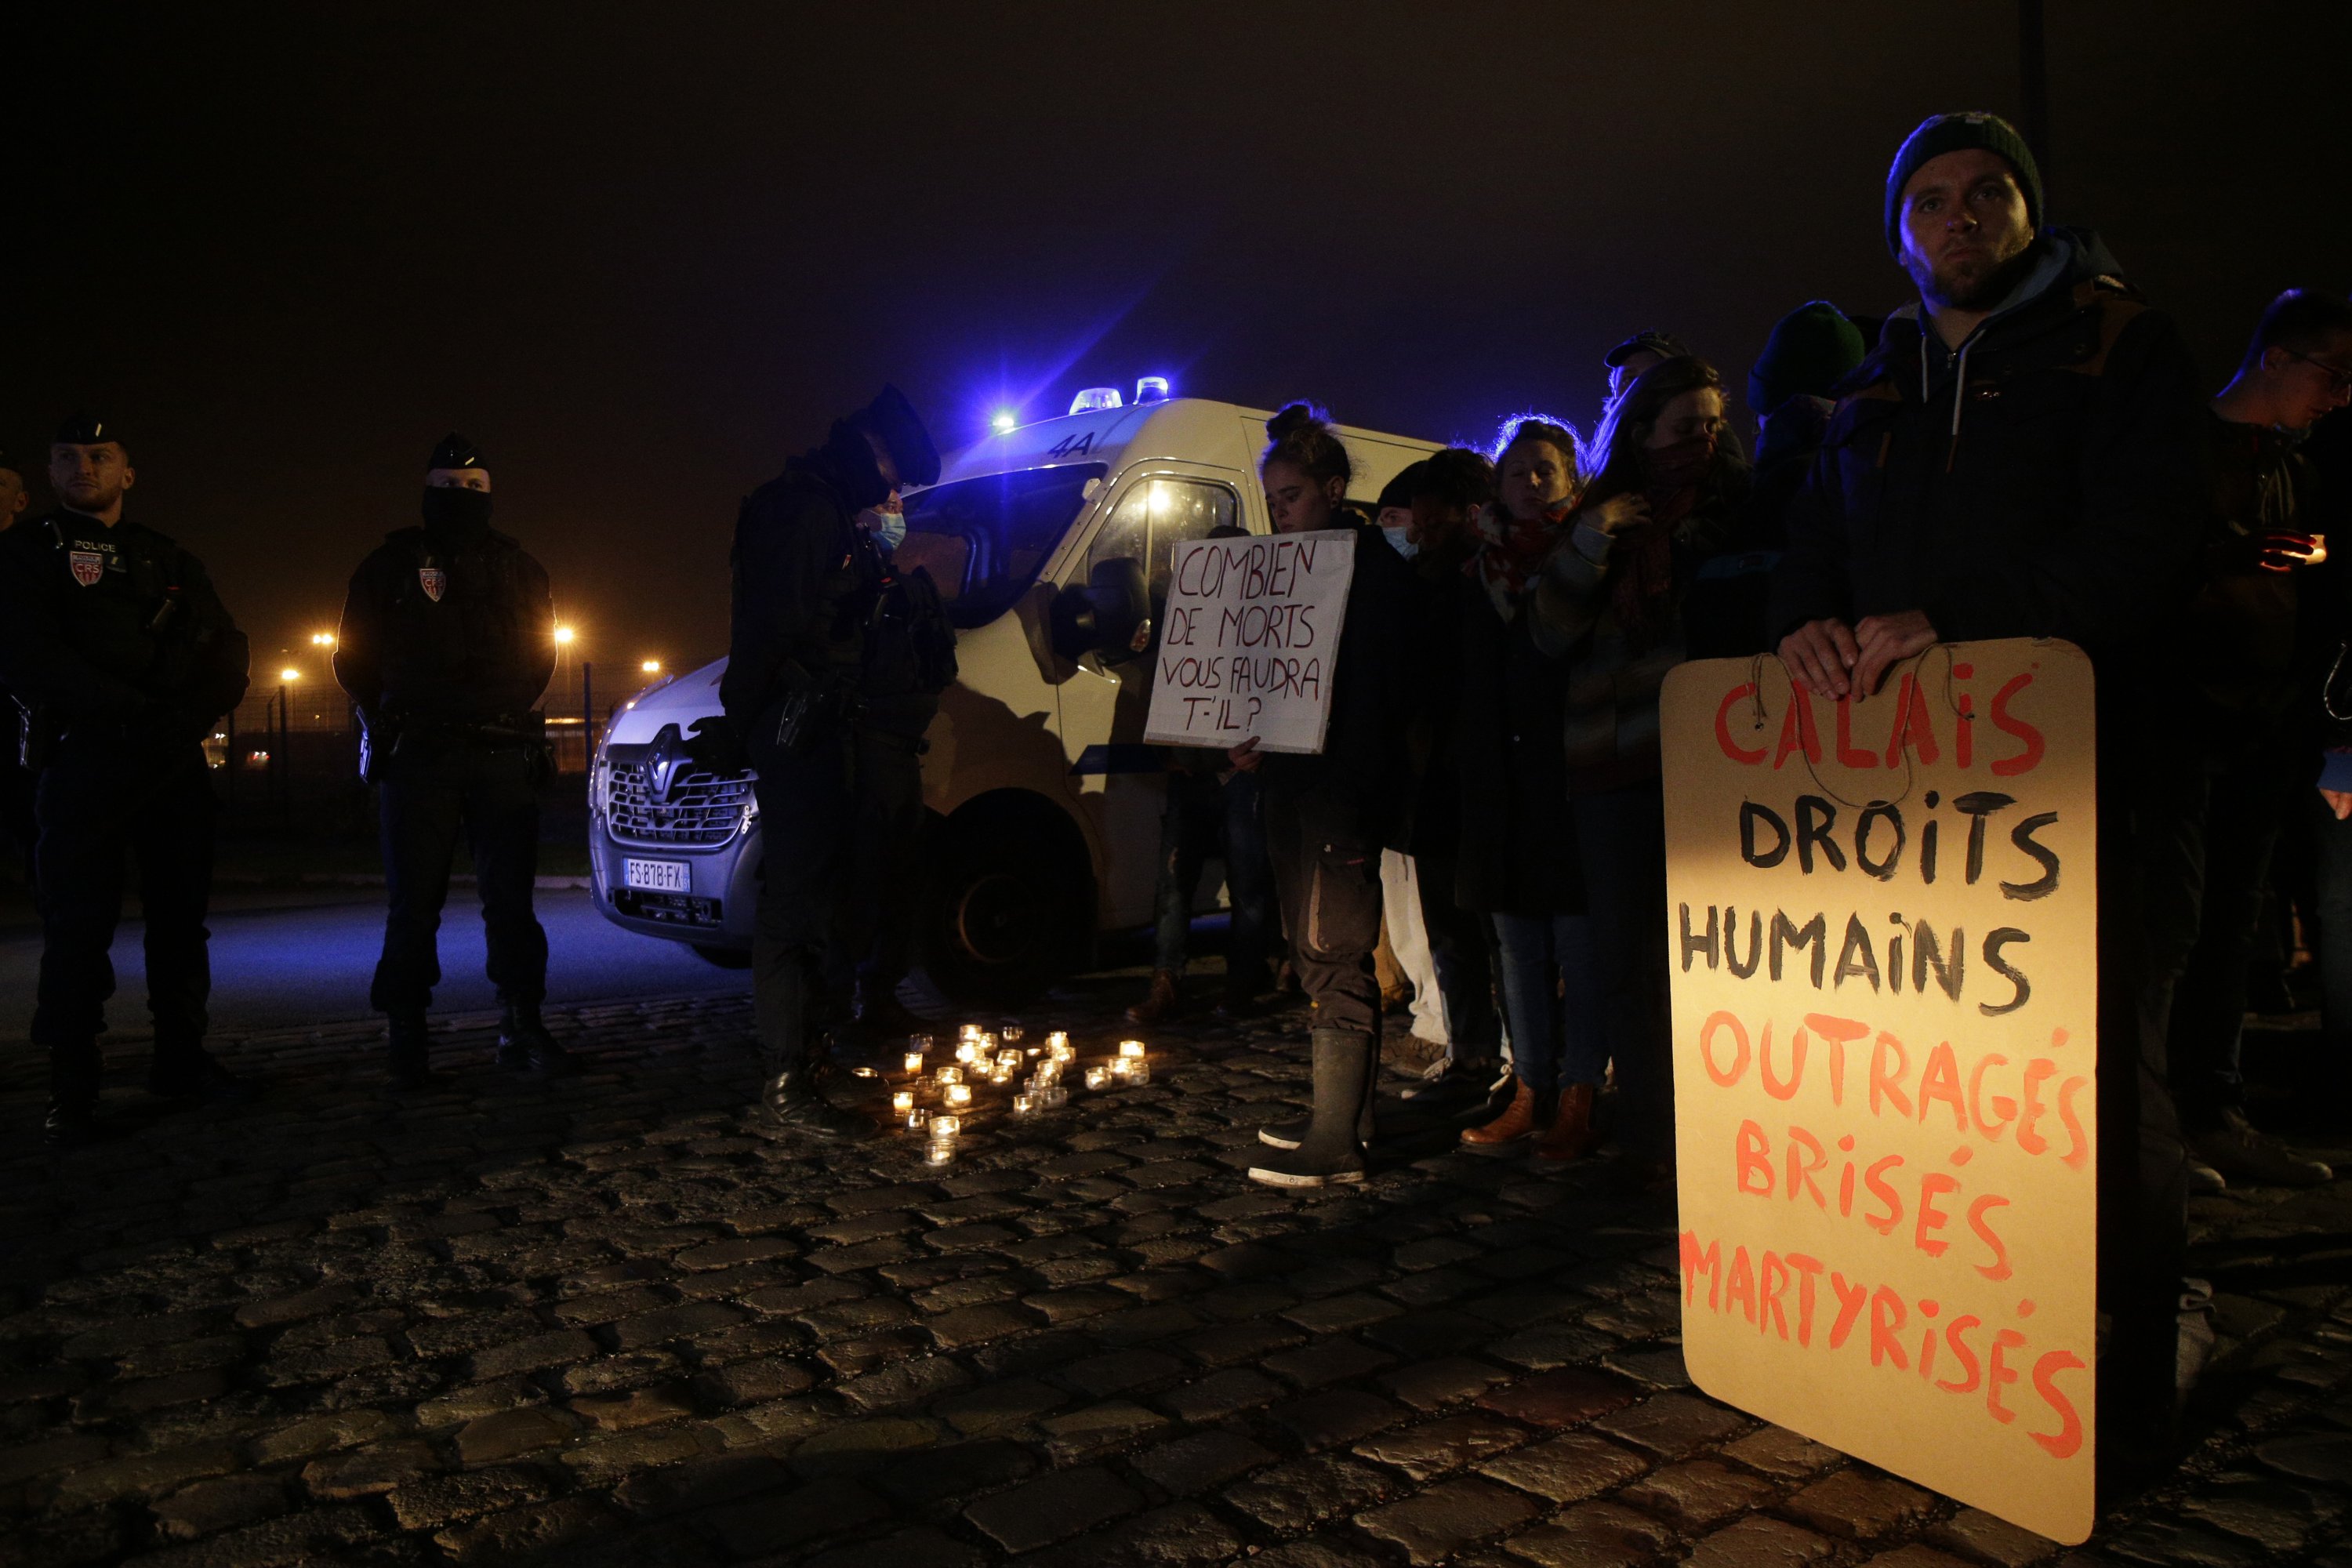 Activists and members of associations defending migrants' rights gather with posters reading "Human rights, outraged, smashed, martyrized" outside the port of Calais, northern France, Nov. 24, 2021. (AP Photo)